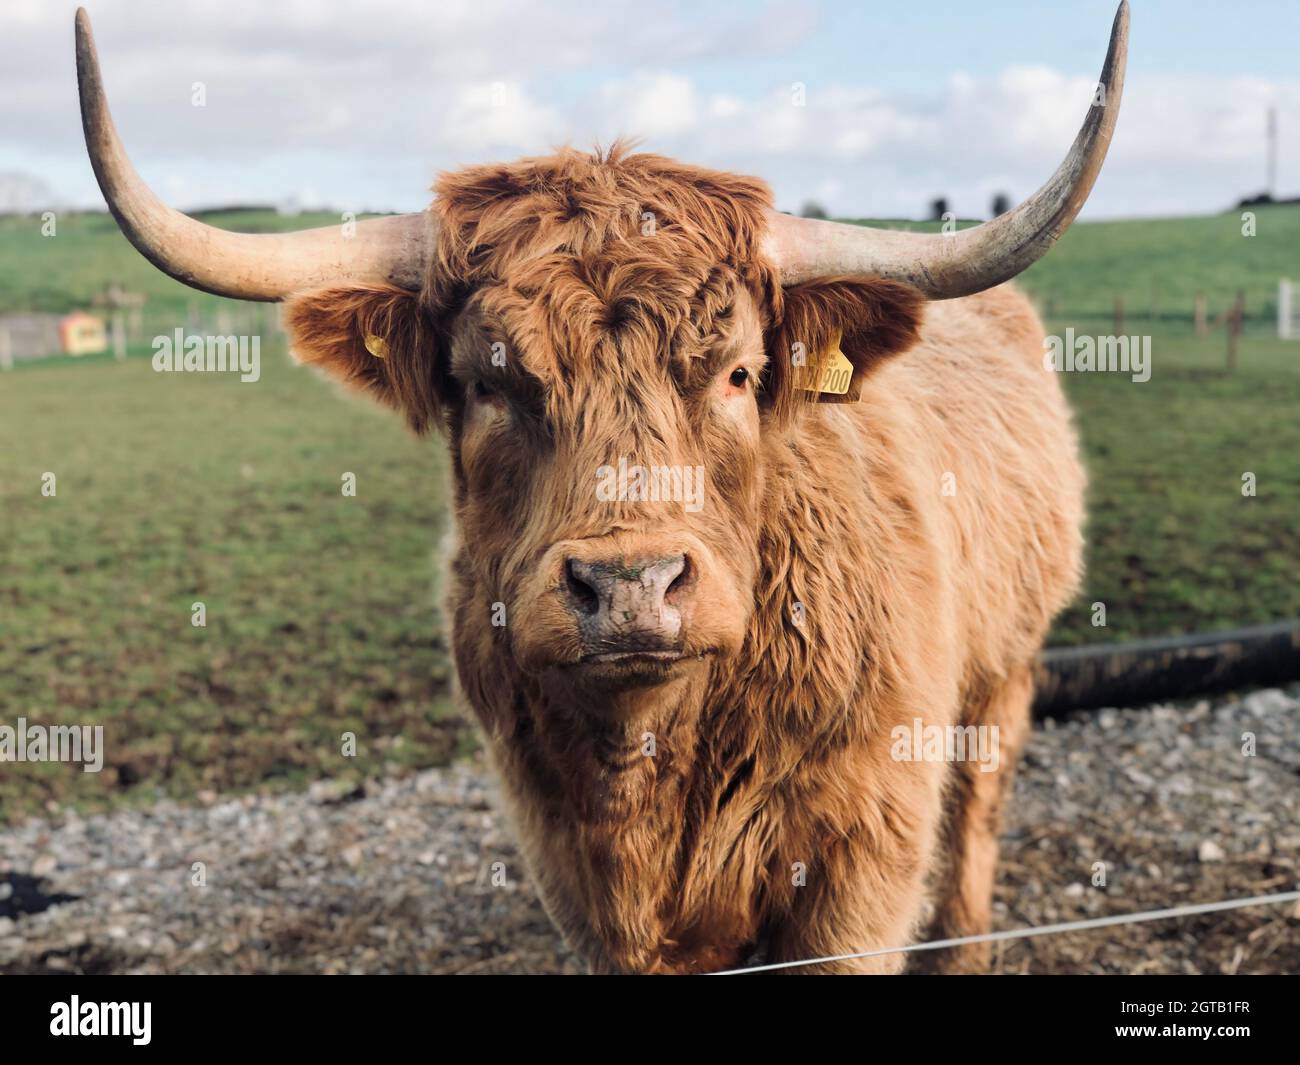 Portrait Of Highland Cattle On Field Stock Photo